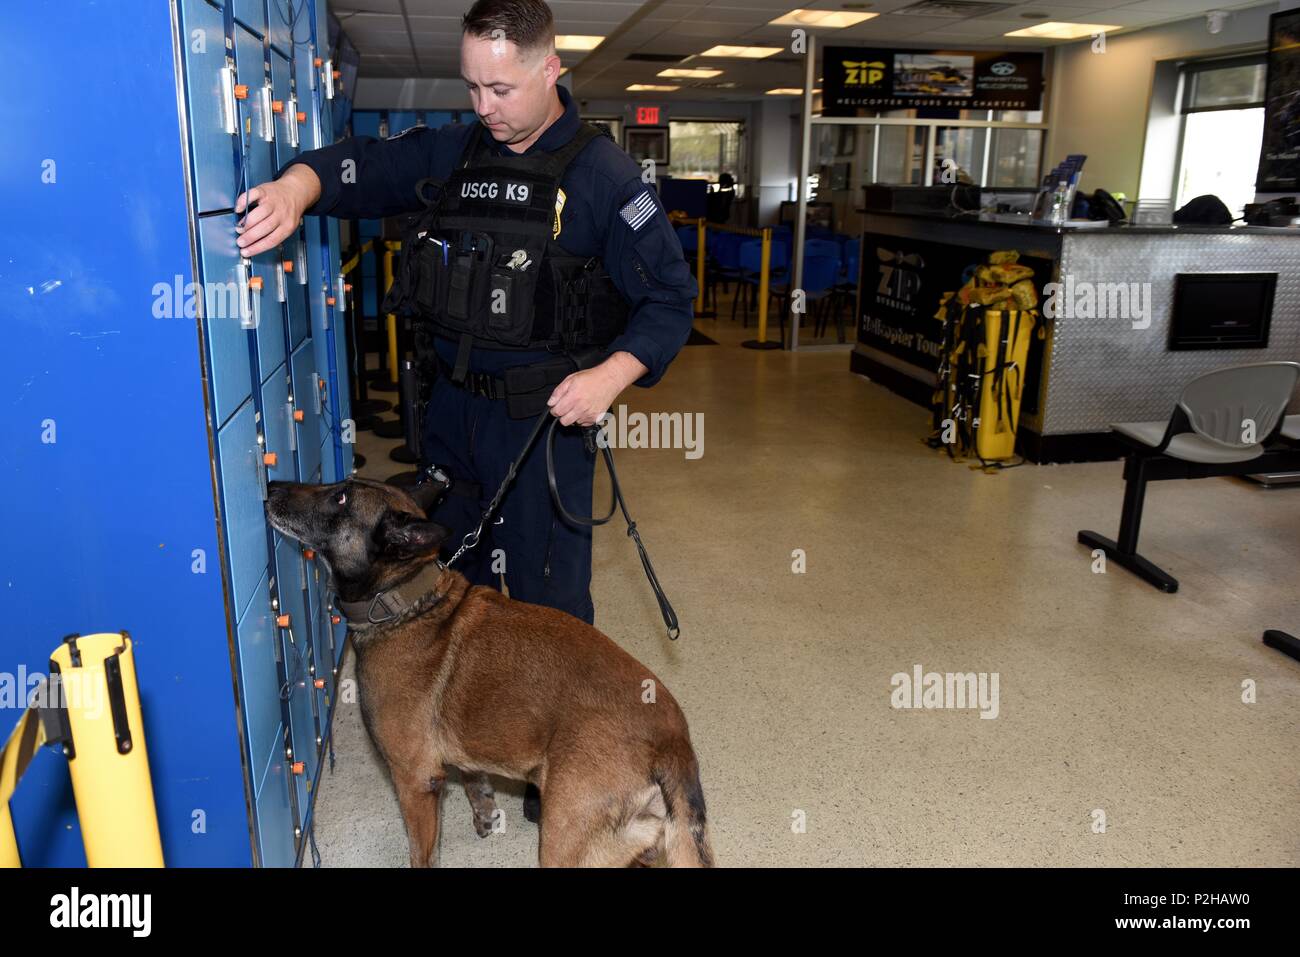 Petty Officer 1st Class Nick Antis, a dog handler with Marine Safety and Security Team 91106 in New York, leads Ryder, a Belgian Malinois explosives detection canine, in a sweep of a building following the United Nations General Assembly at the Pier 6-Downtown Manhattan Heliport in New York City, September 21, 2016. The Coast Guard canine explosives detection program enhances the detection and deterrence capabilities in the maritime environment, adjacent lands and waterside installations. (U.S. Coast Guard photo by Petty Officer 2nd Class Sabrina Clarke.) Stock Photo